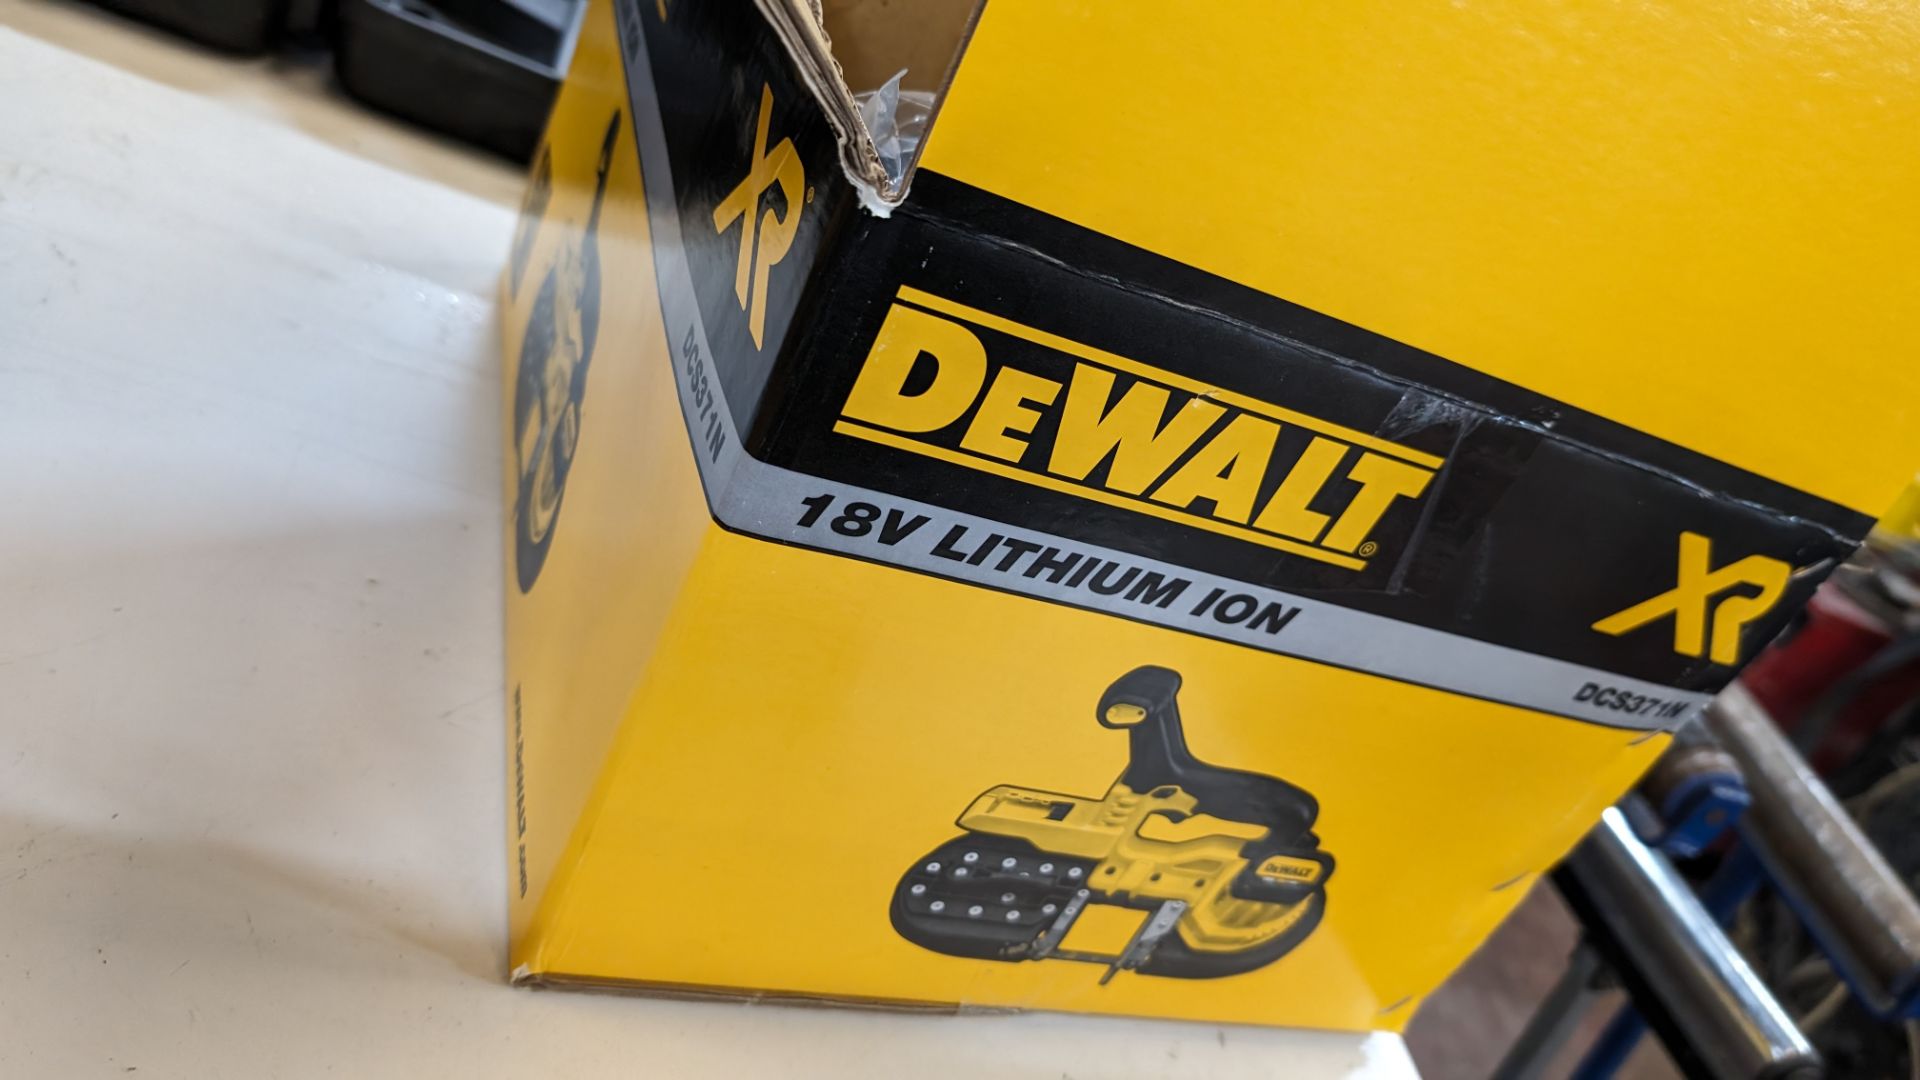 DeWalt XR model DCS371N cordless bandsaw. Bare unit, no battery or charger. Appears new & unused - - Image 8 of 8